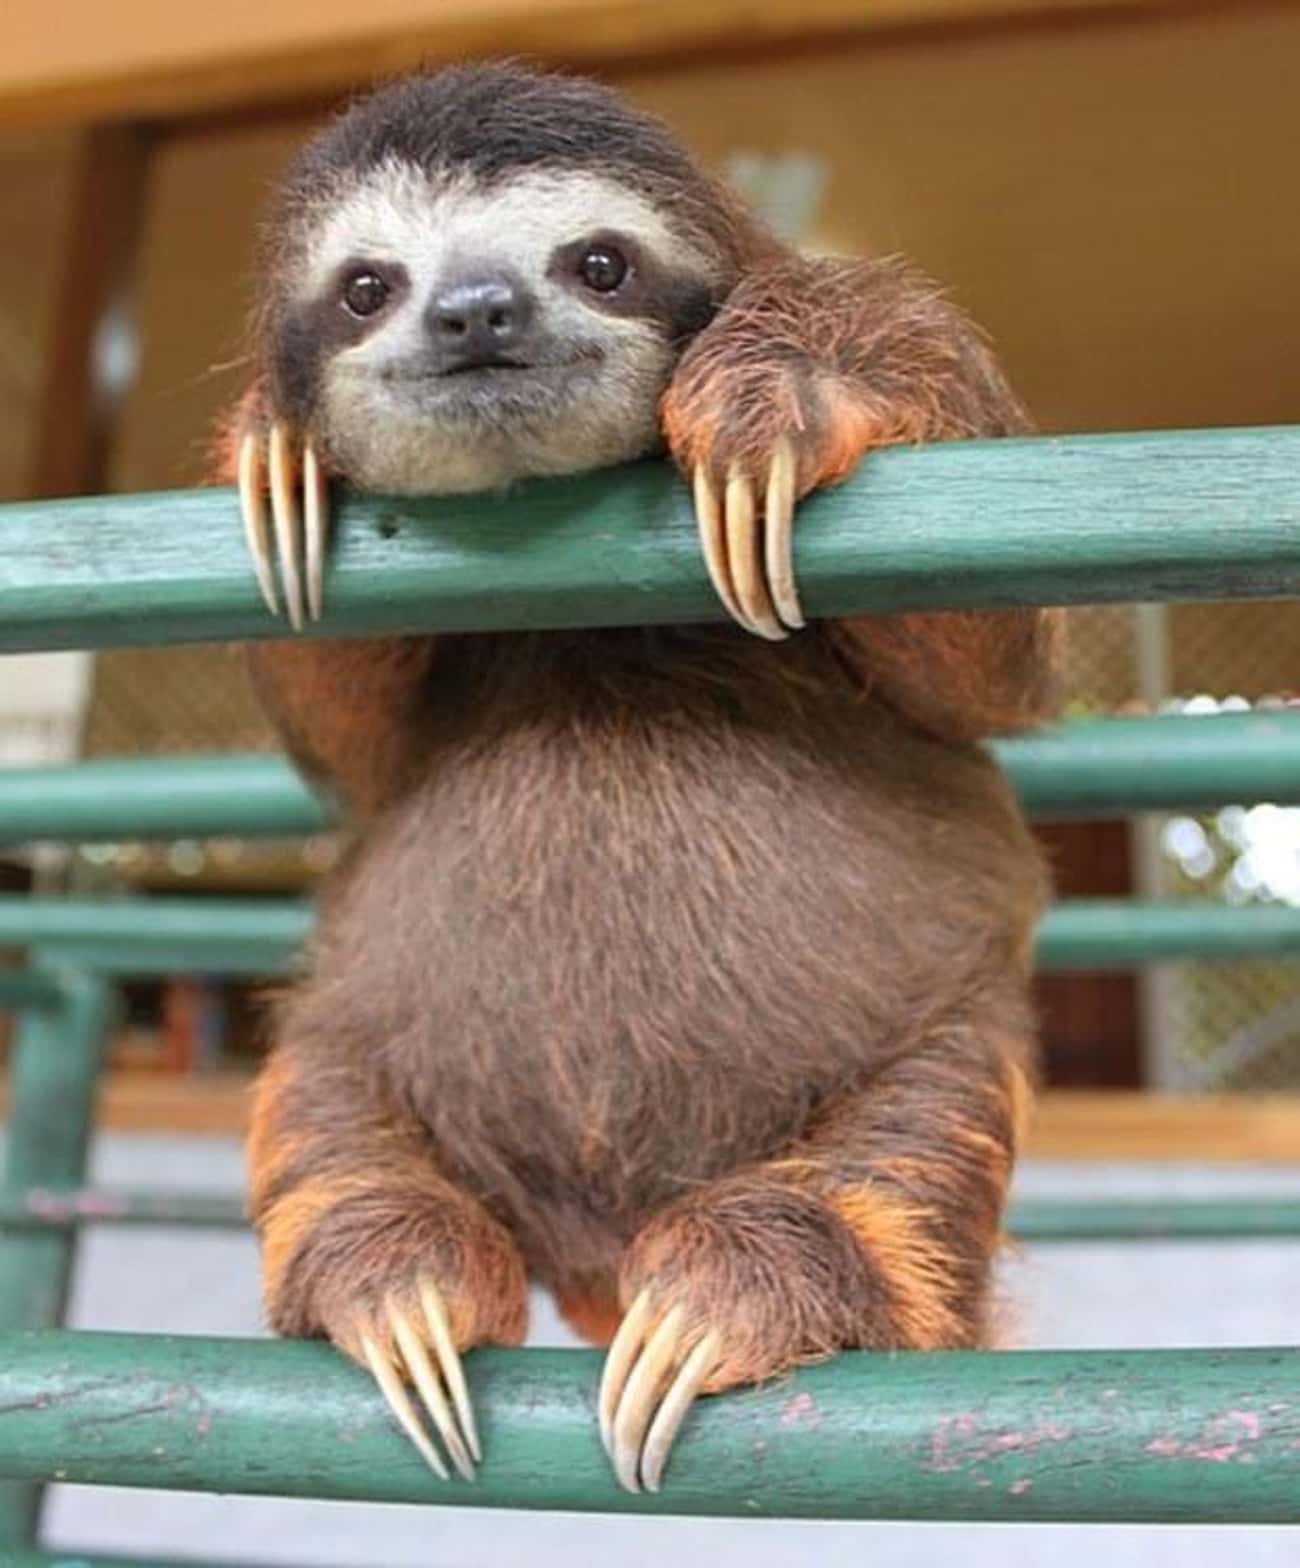 This Happily Chilling Sloth